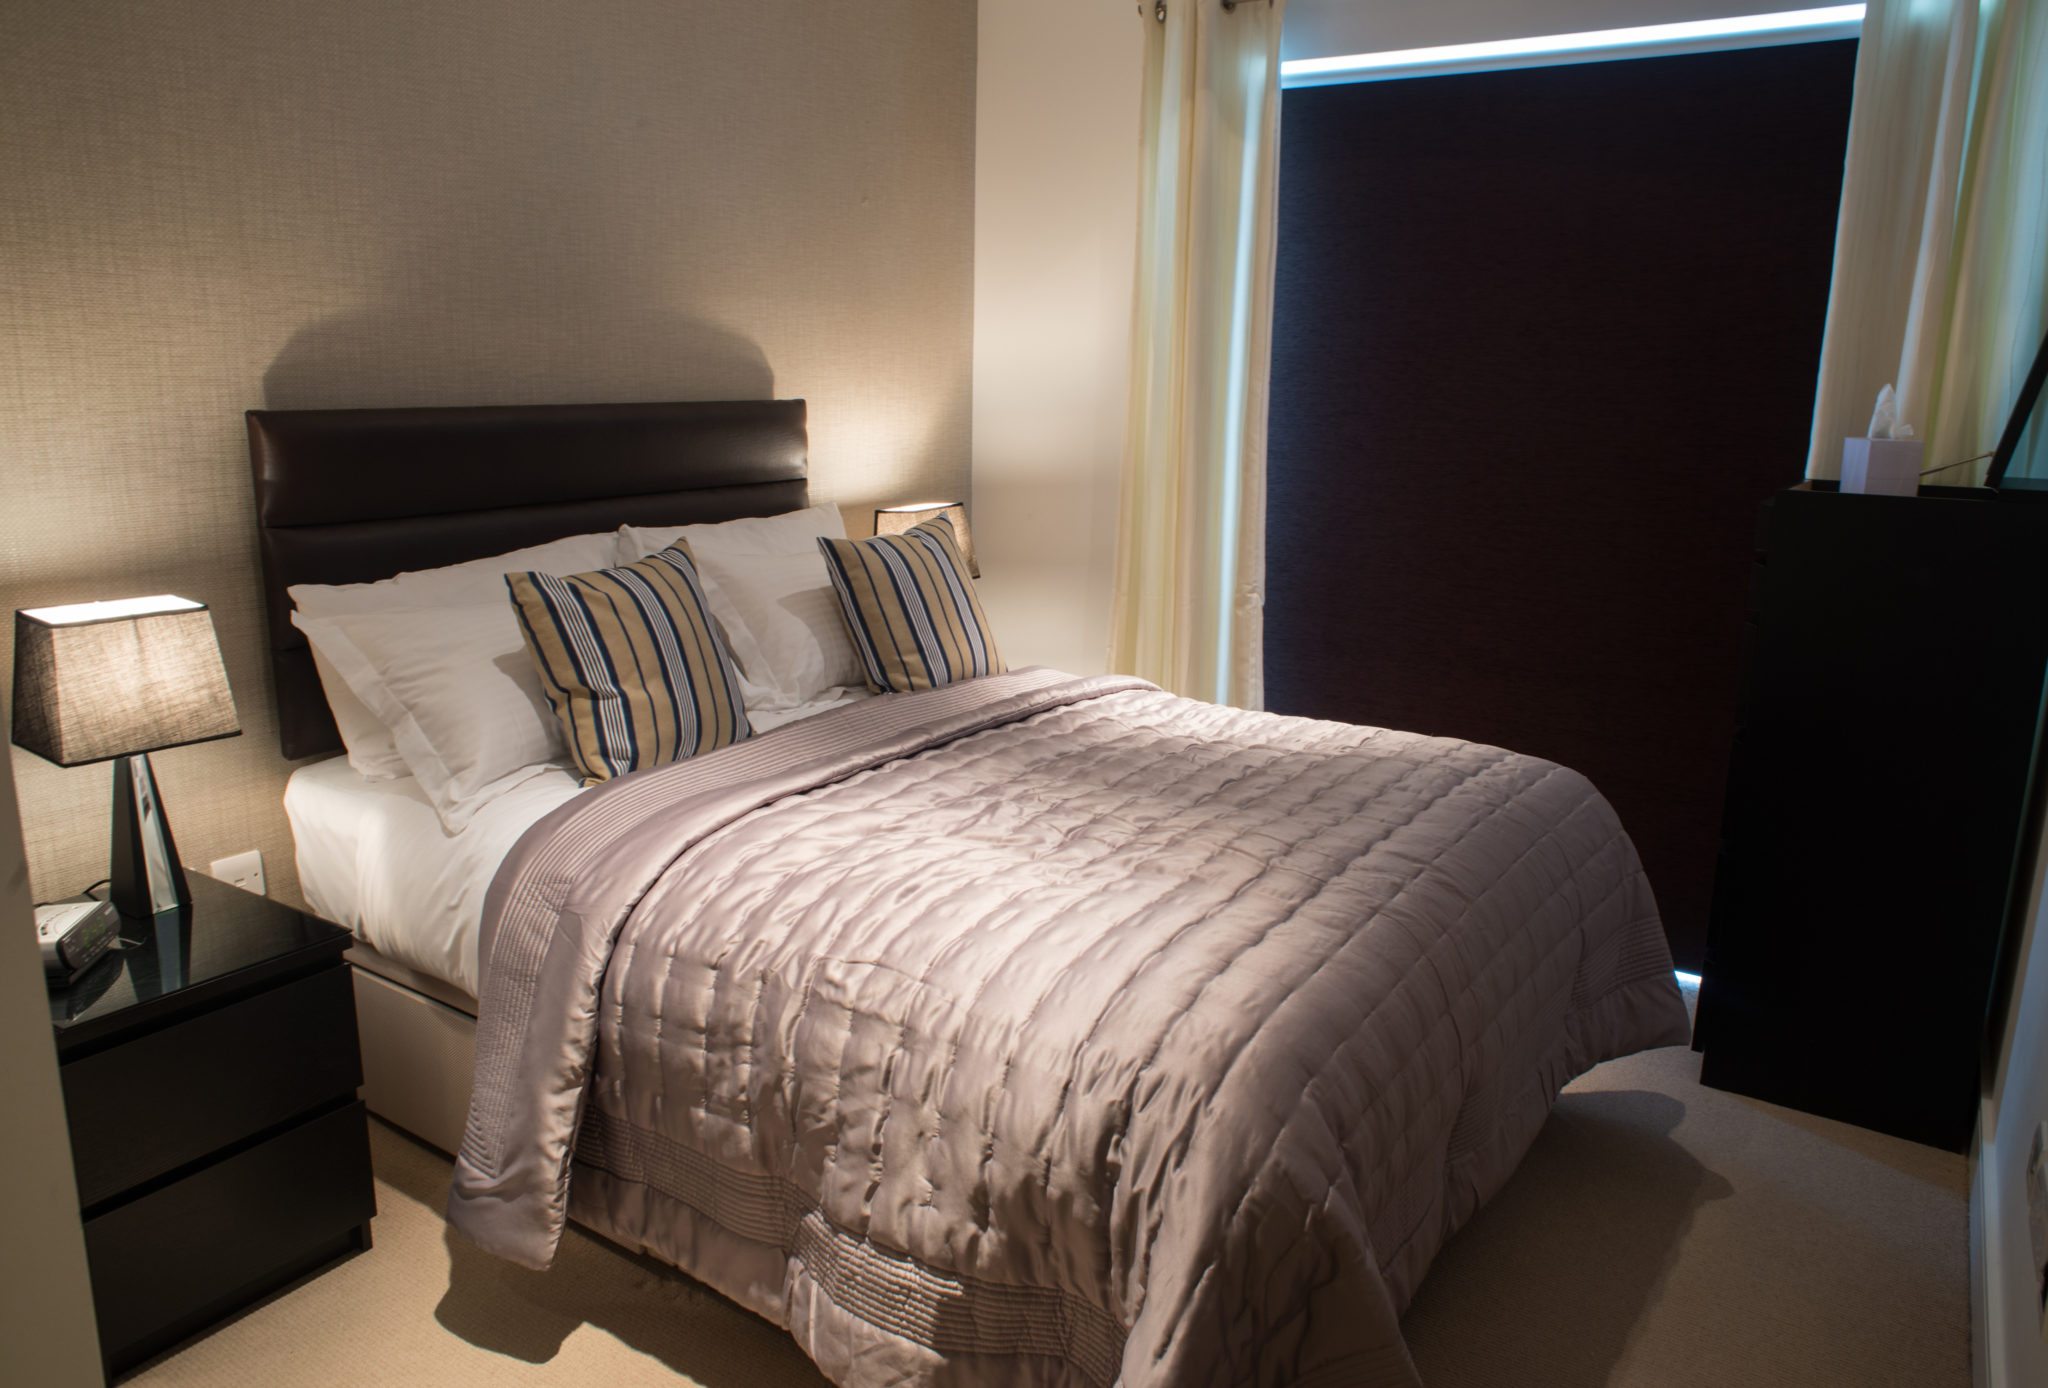 Serviced Apartments Ealing | Corporate Accommodation West London | Short Lets | Corporate Housing | Relocation | Award Winning & Quality Accredited BOOK NOW - Urban Stay